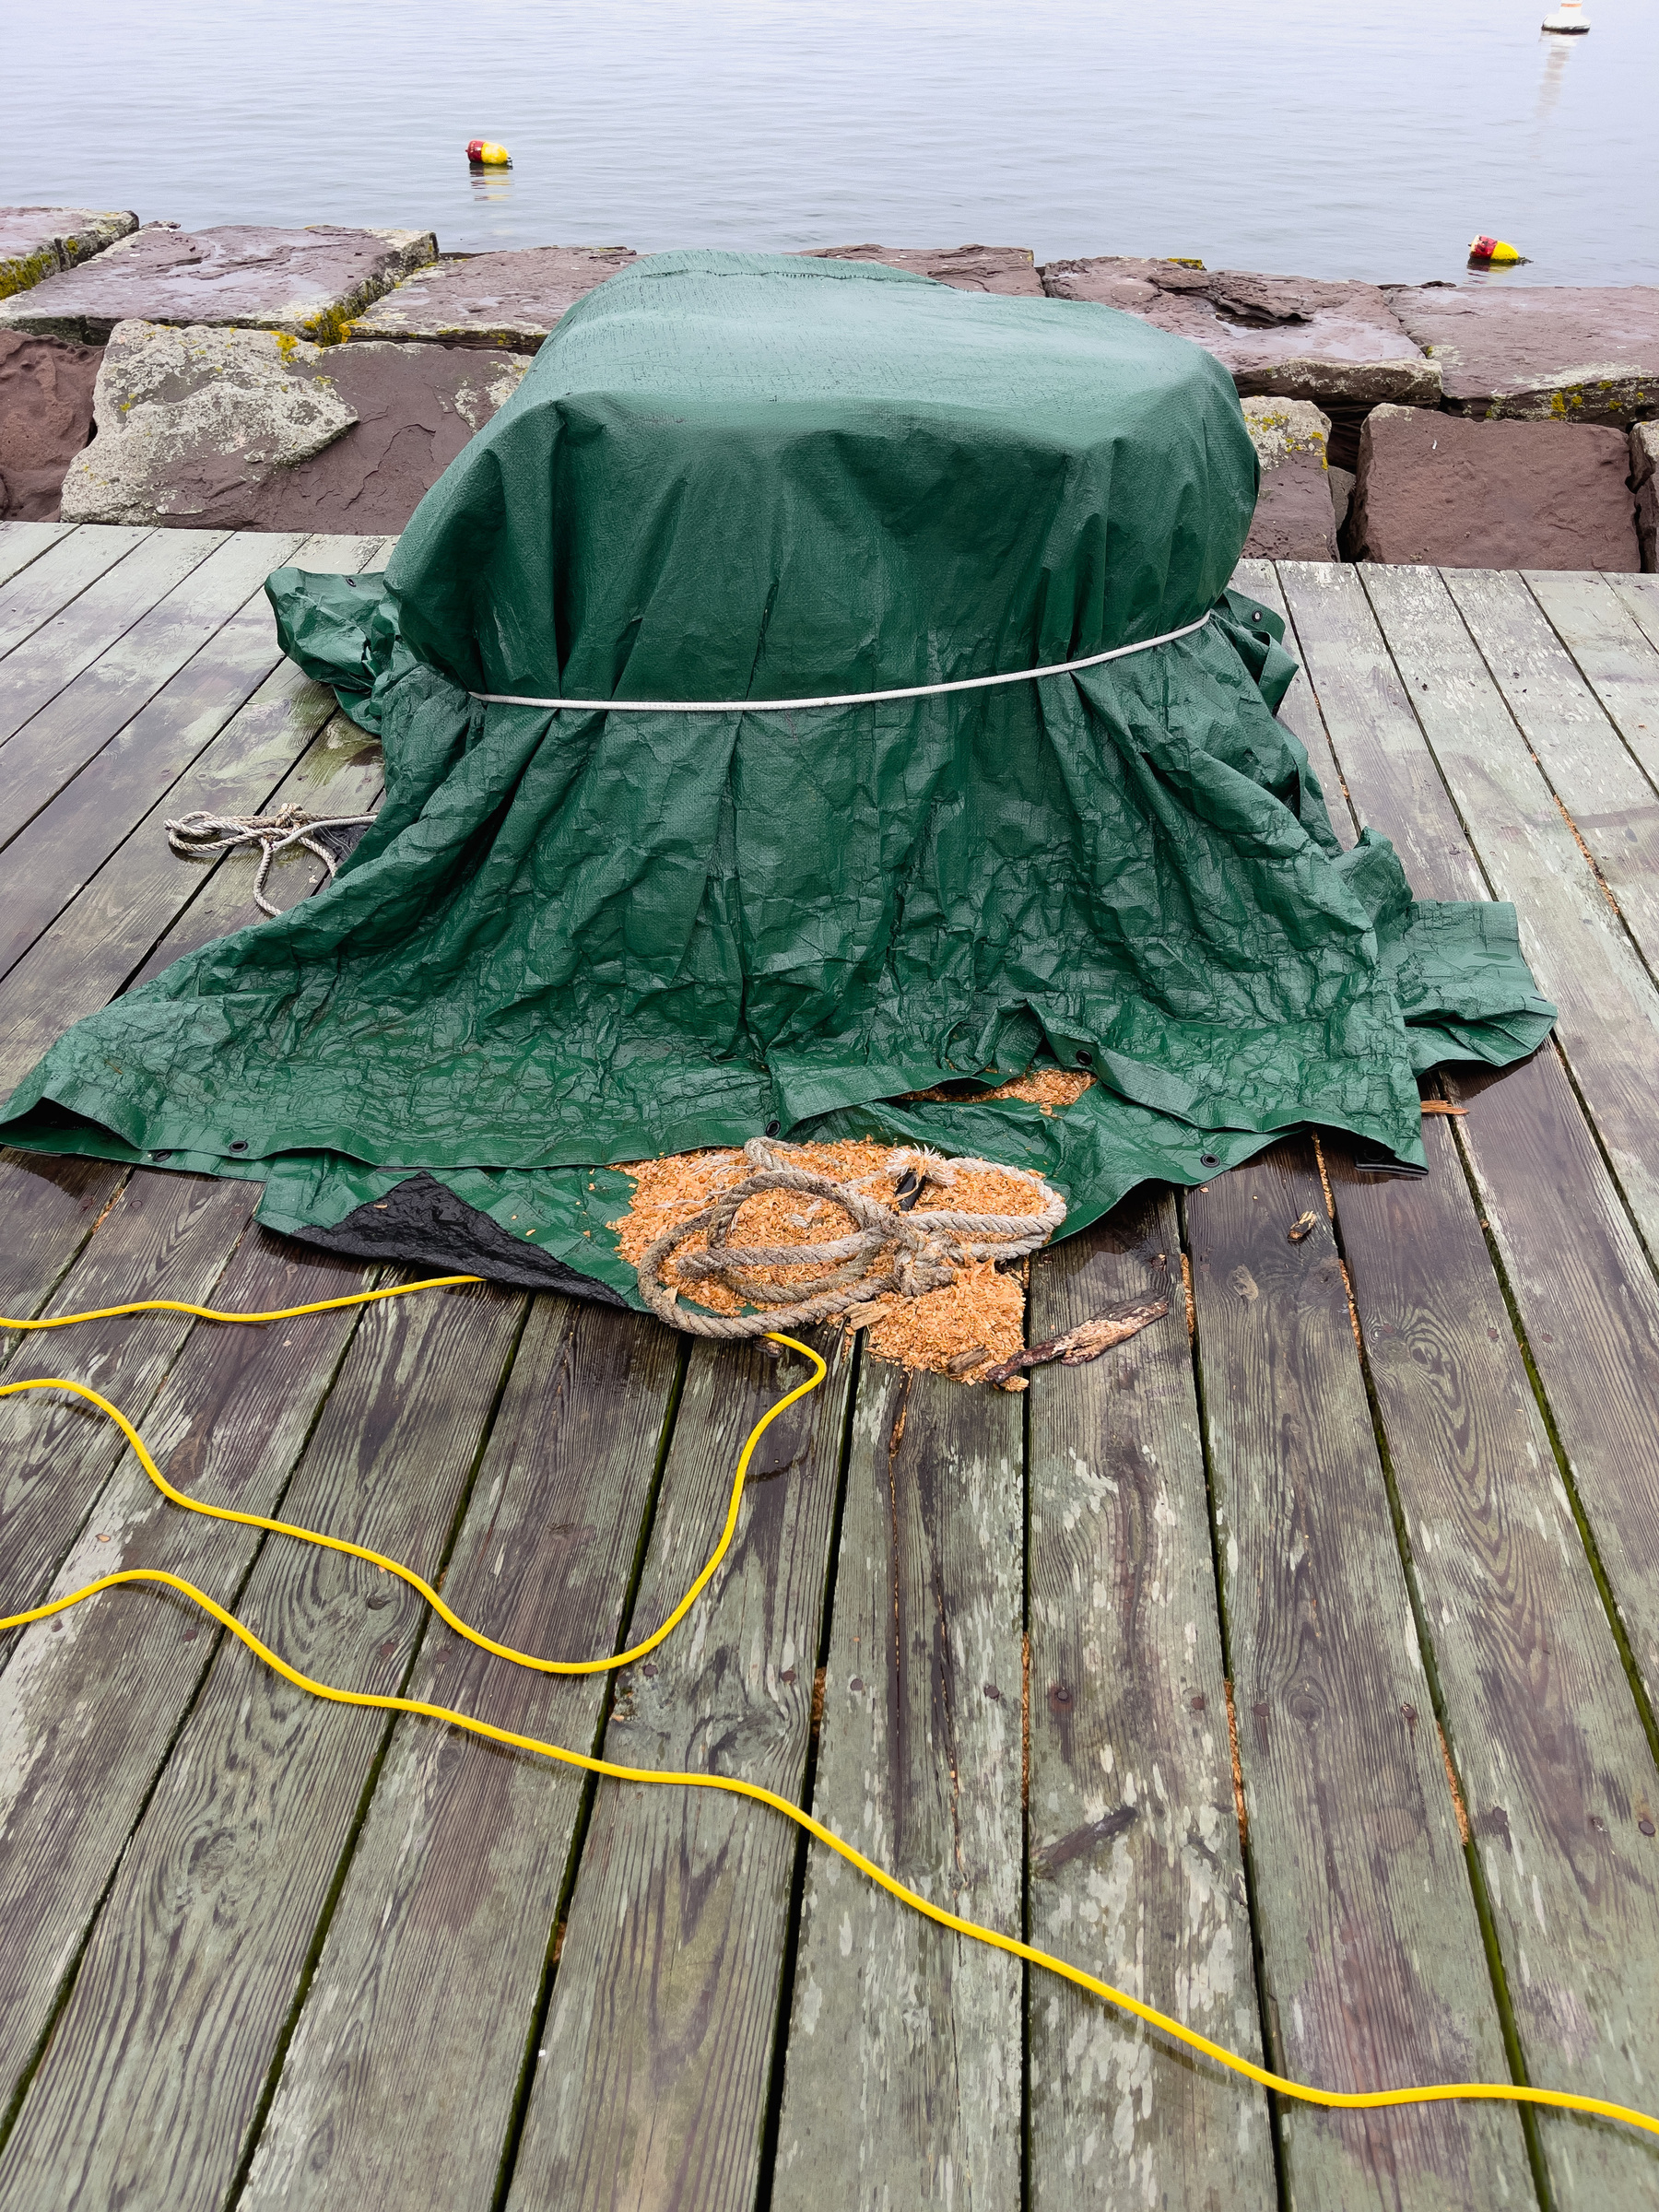 Green tarp over rectangular objects with rope and yellow power chord on dock boards in front.